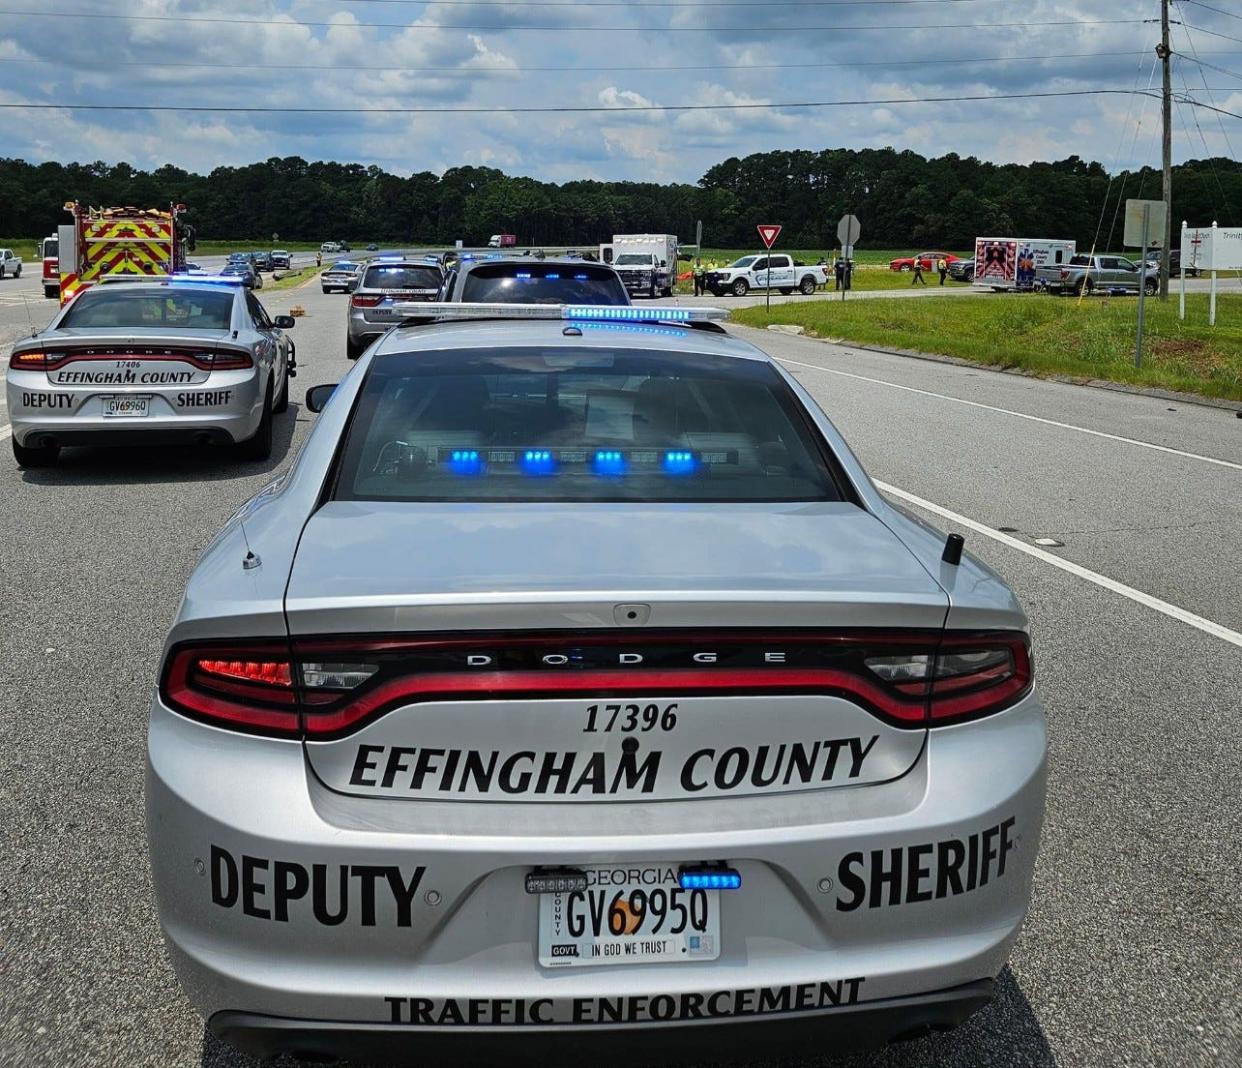 The Effingham County Sheriff's Office responded to a wreck June 17 that killed one and left two injured. The crash took place in Springfield.